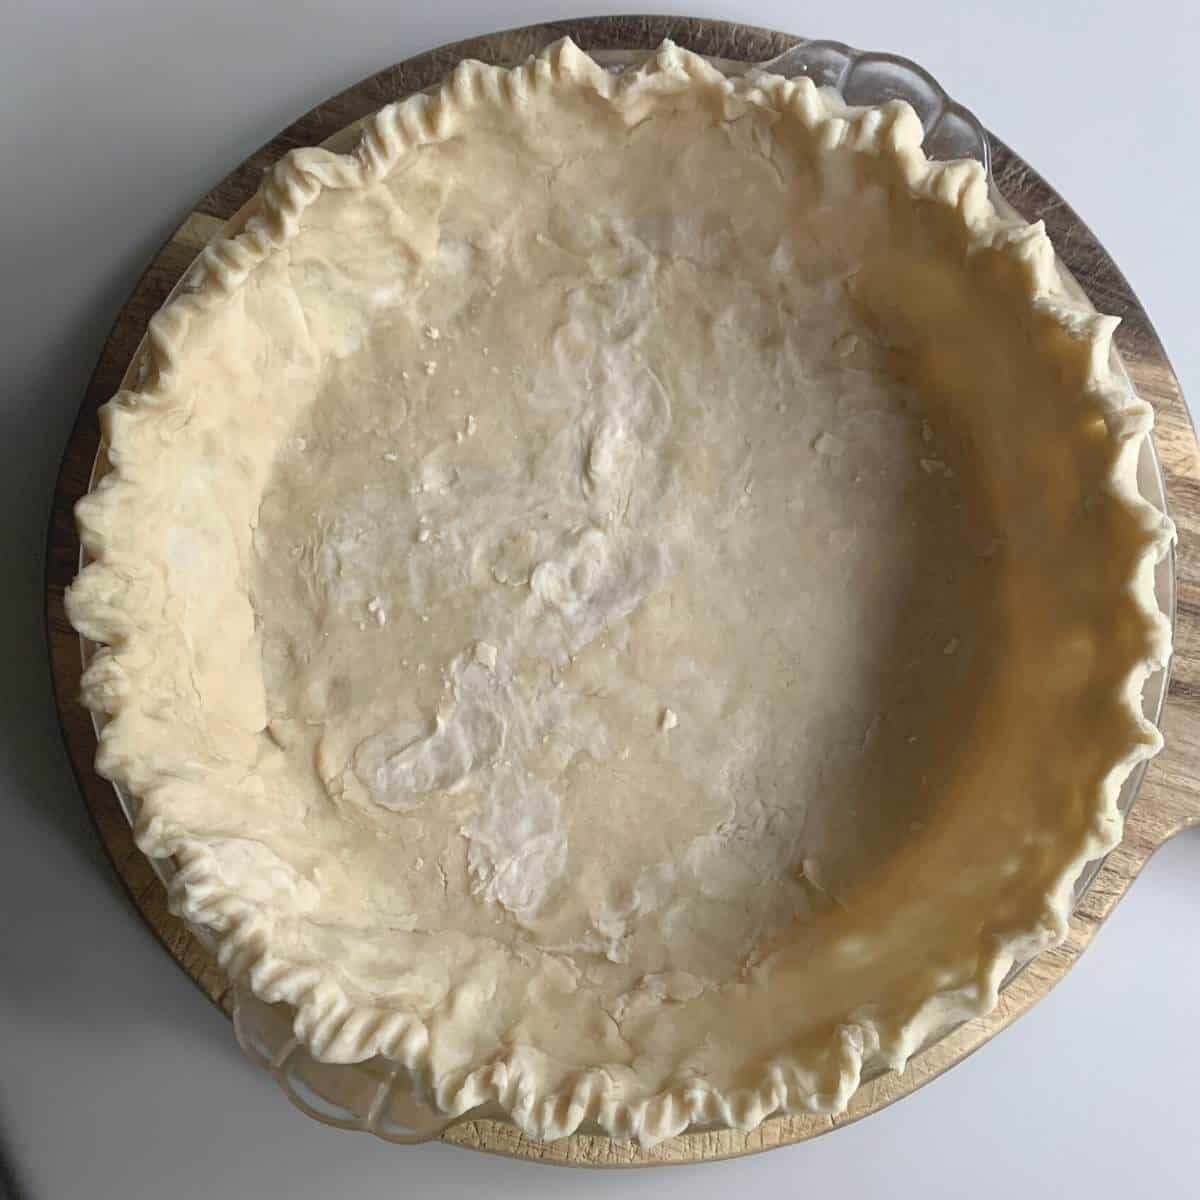 unbaked pie shell without filling